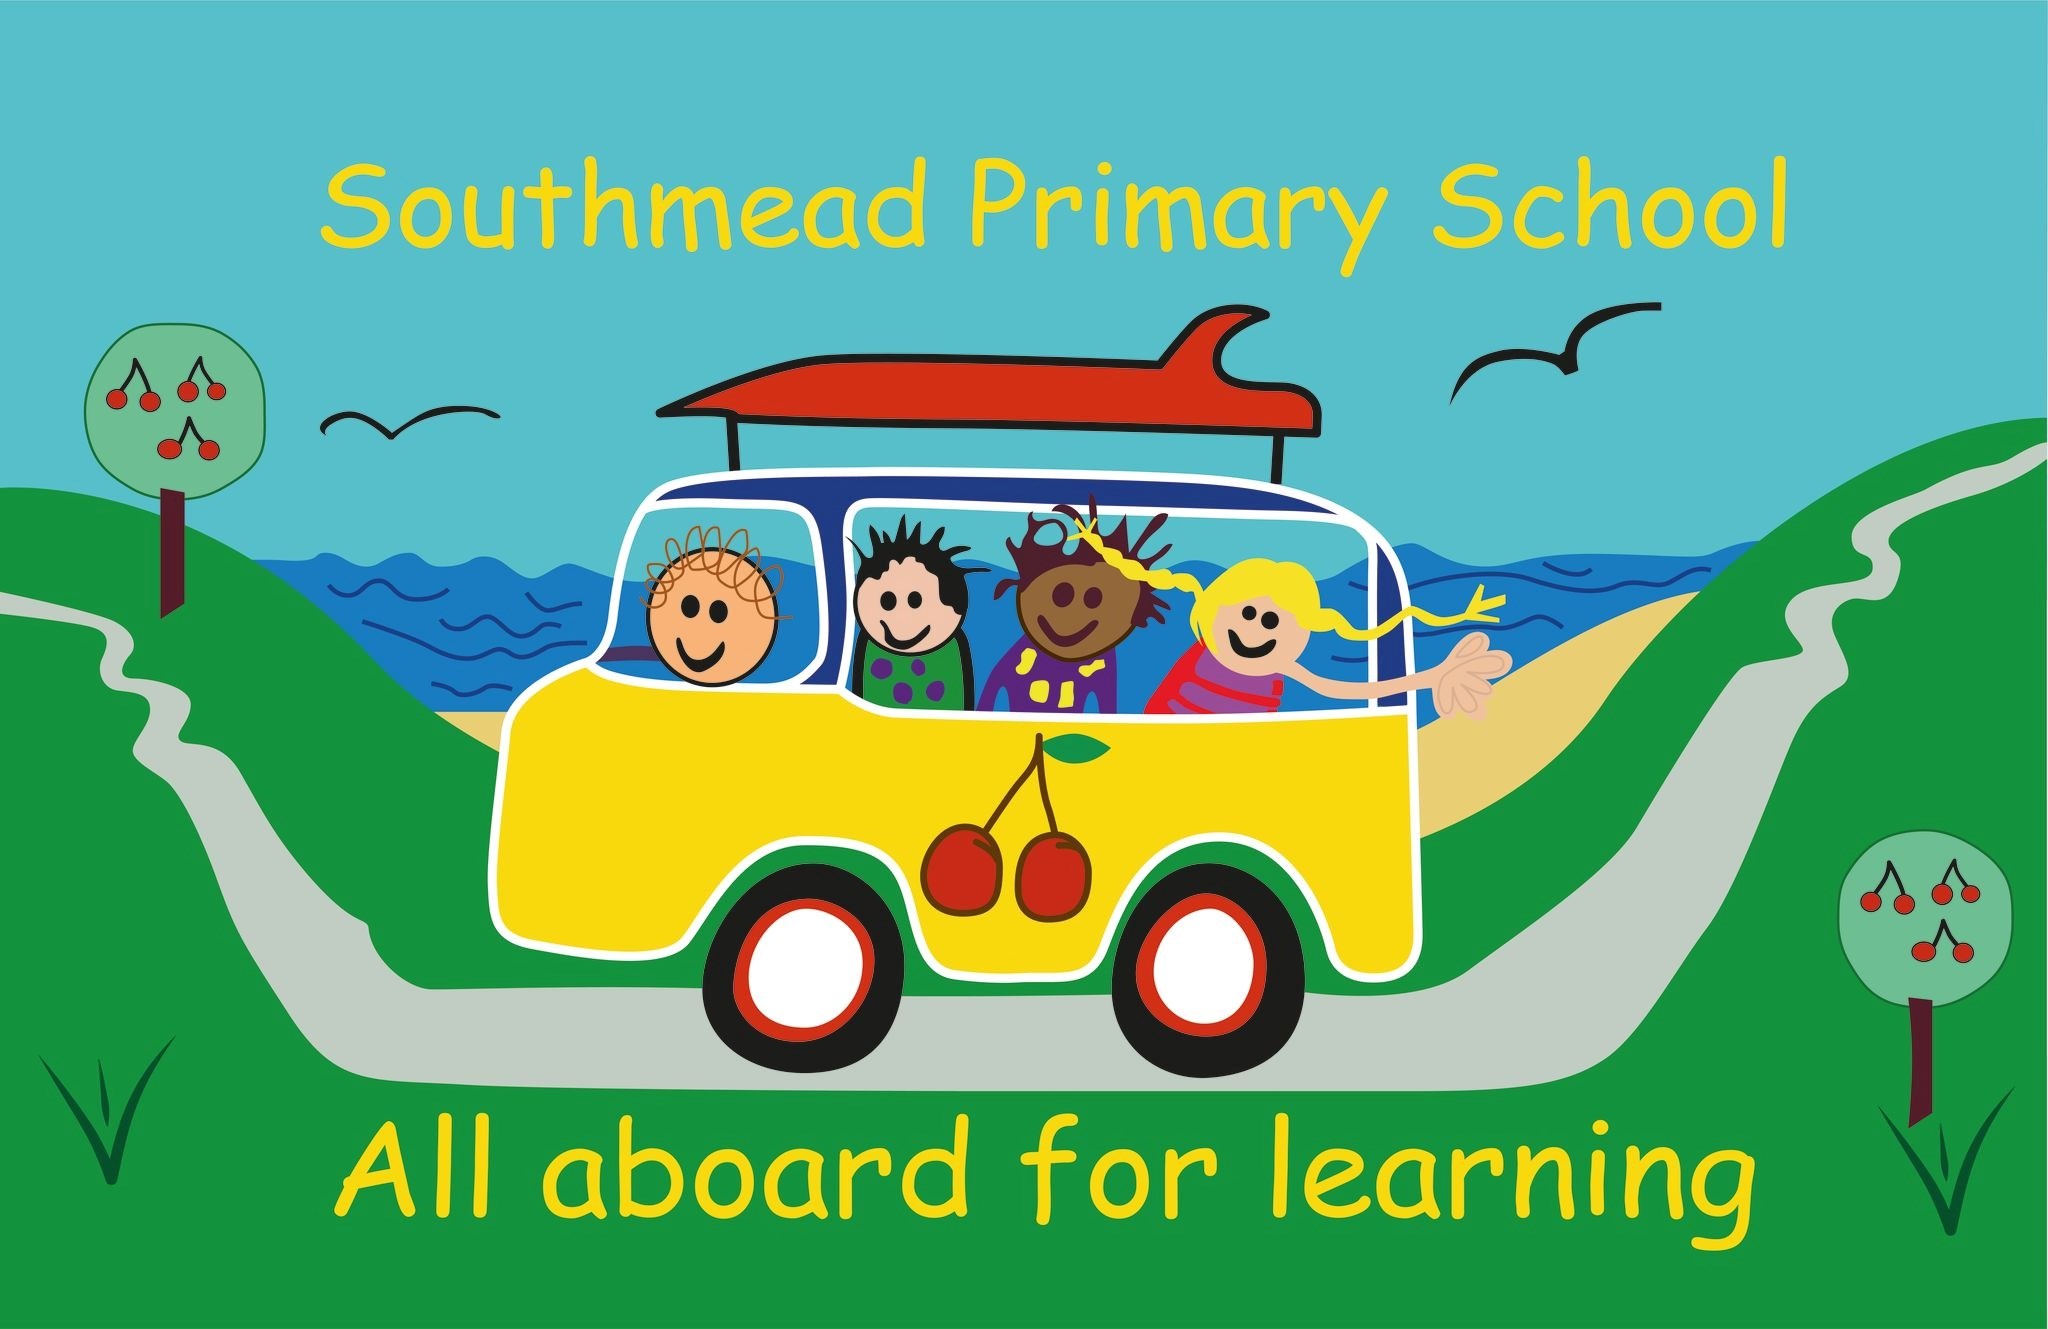 Optoma Creative Touch Interactive Displays Set the Standard at Southmead Primary School